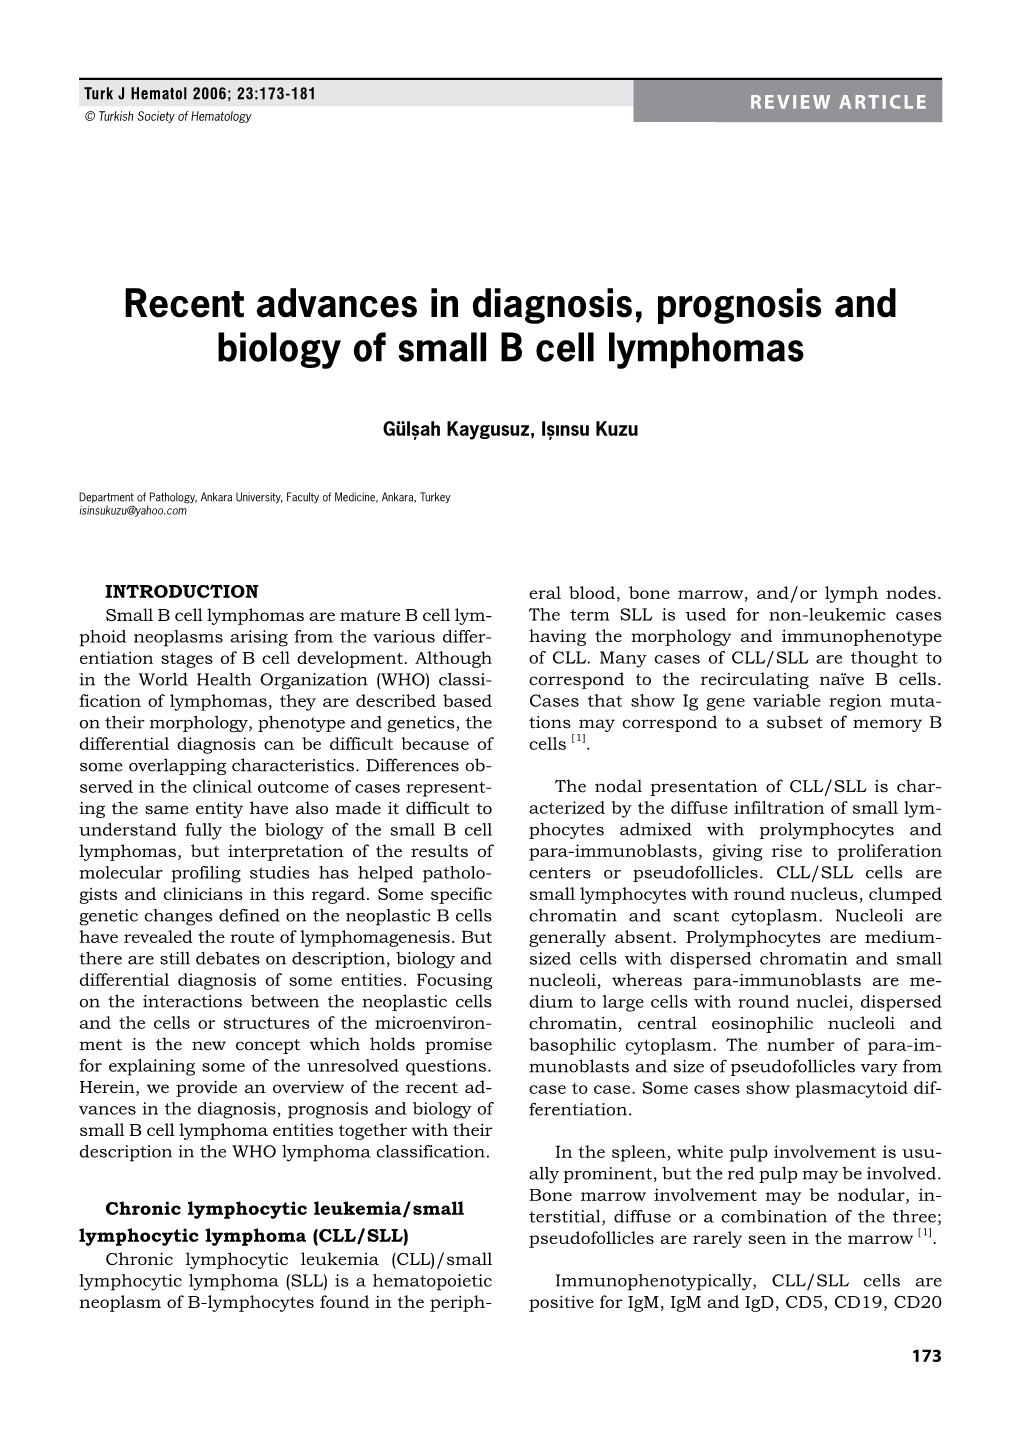 Recent Advances in Diagnosis, Prognosis and Biology of Small B Cell Lymphomas